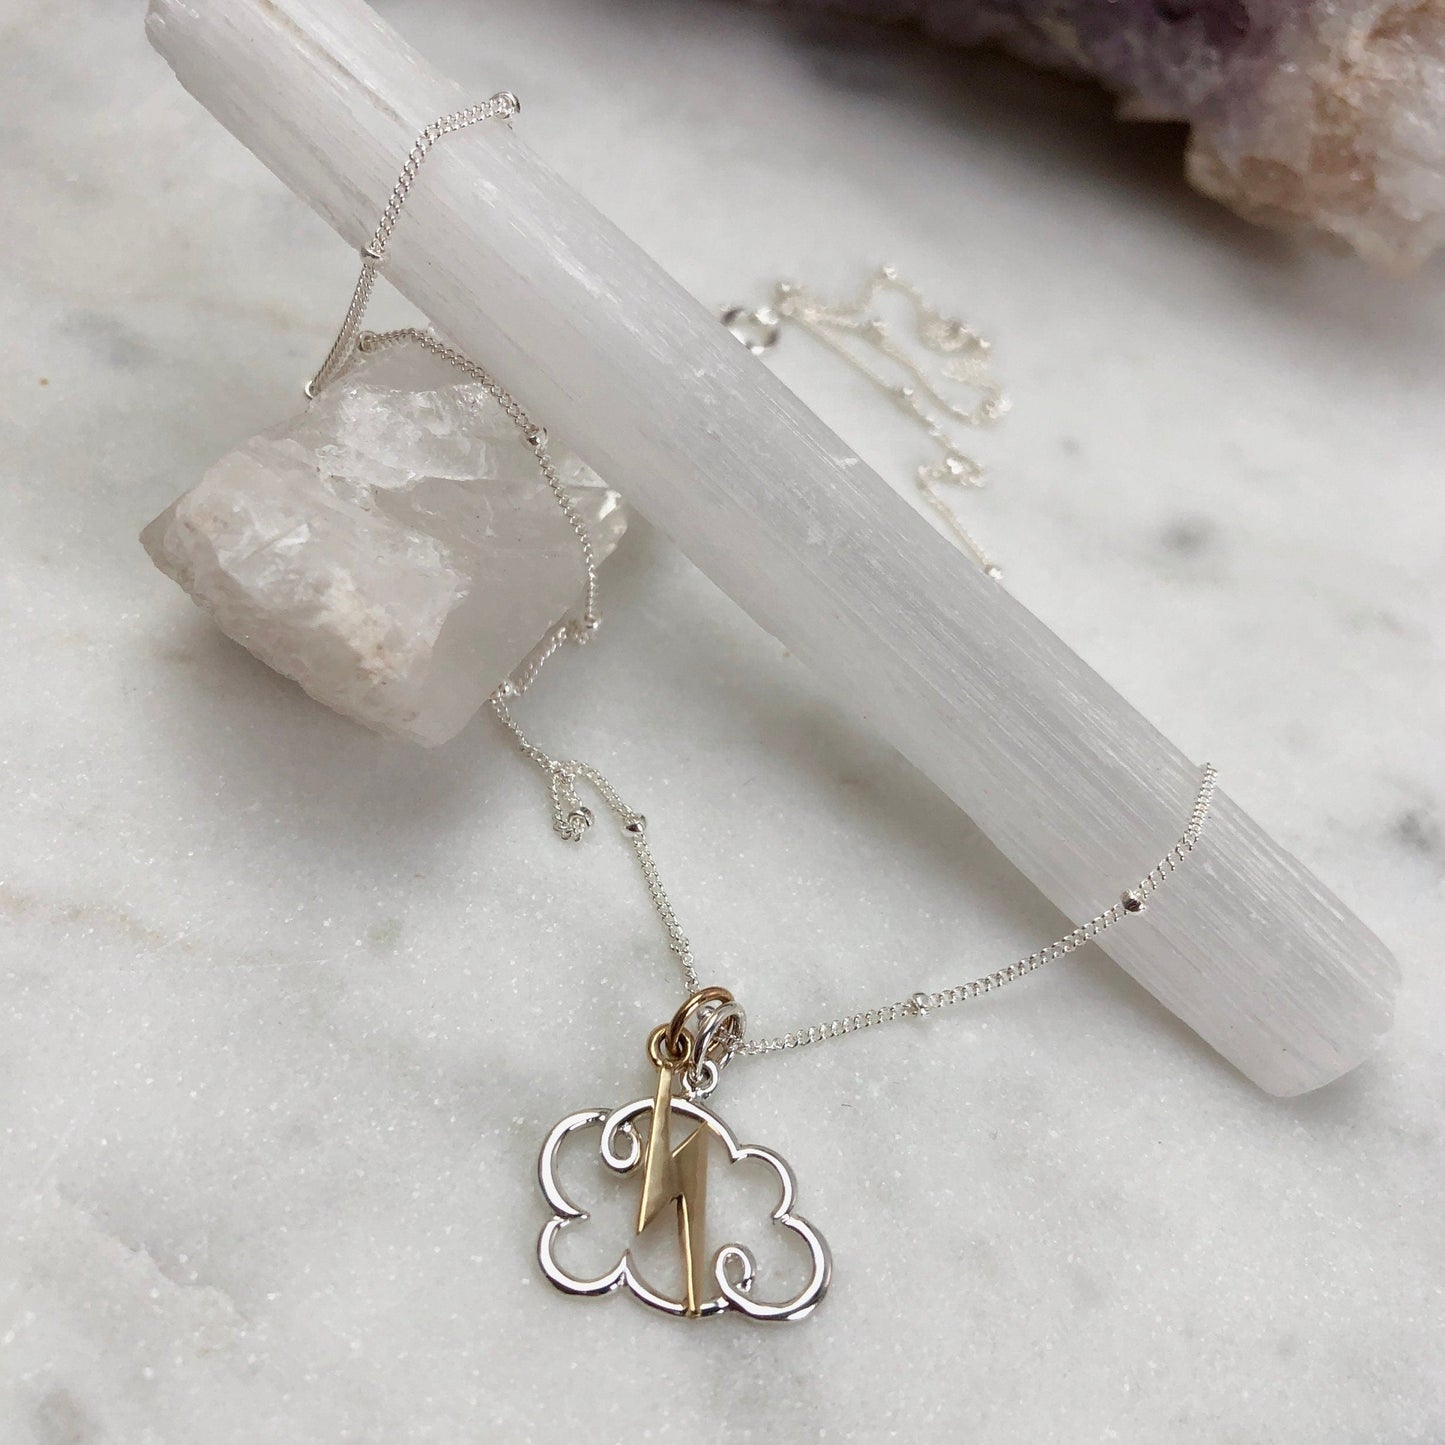 Fluffy Cloud & Lightening Charm Necklace, Sky Charm Necklace